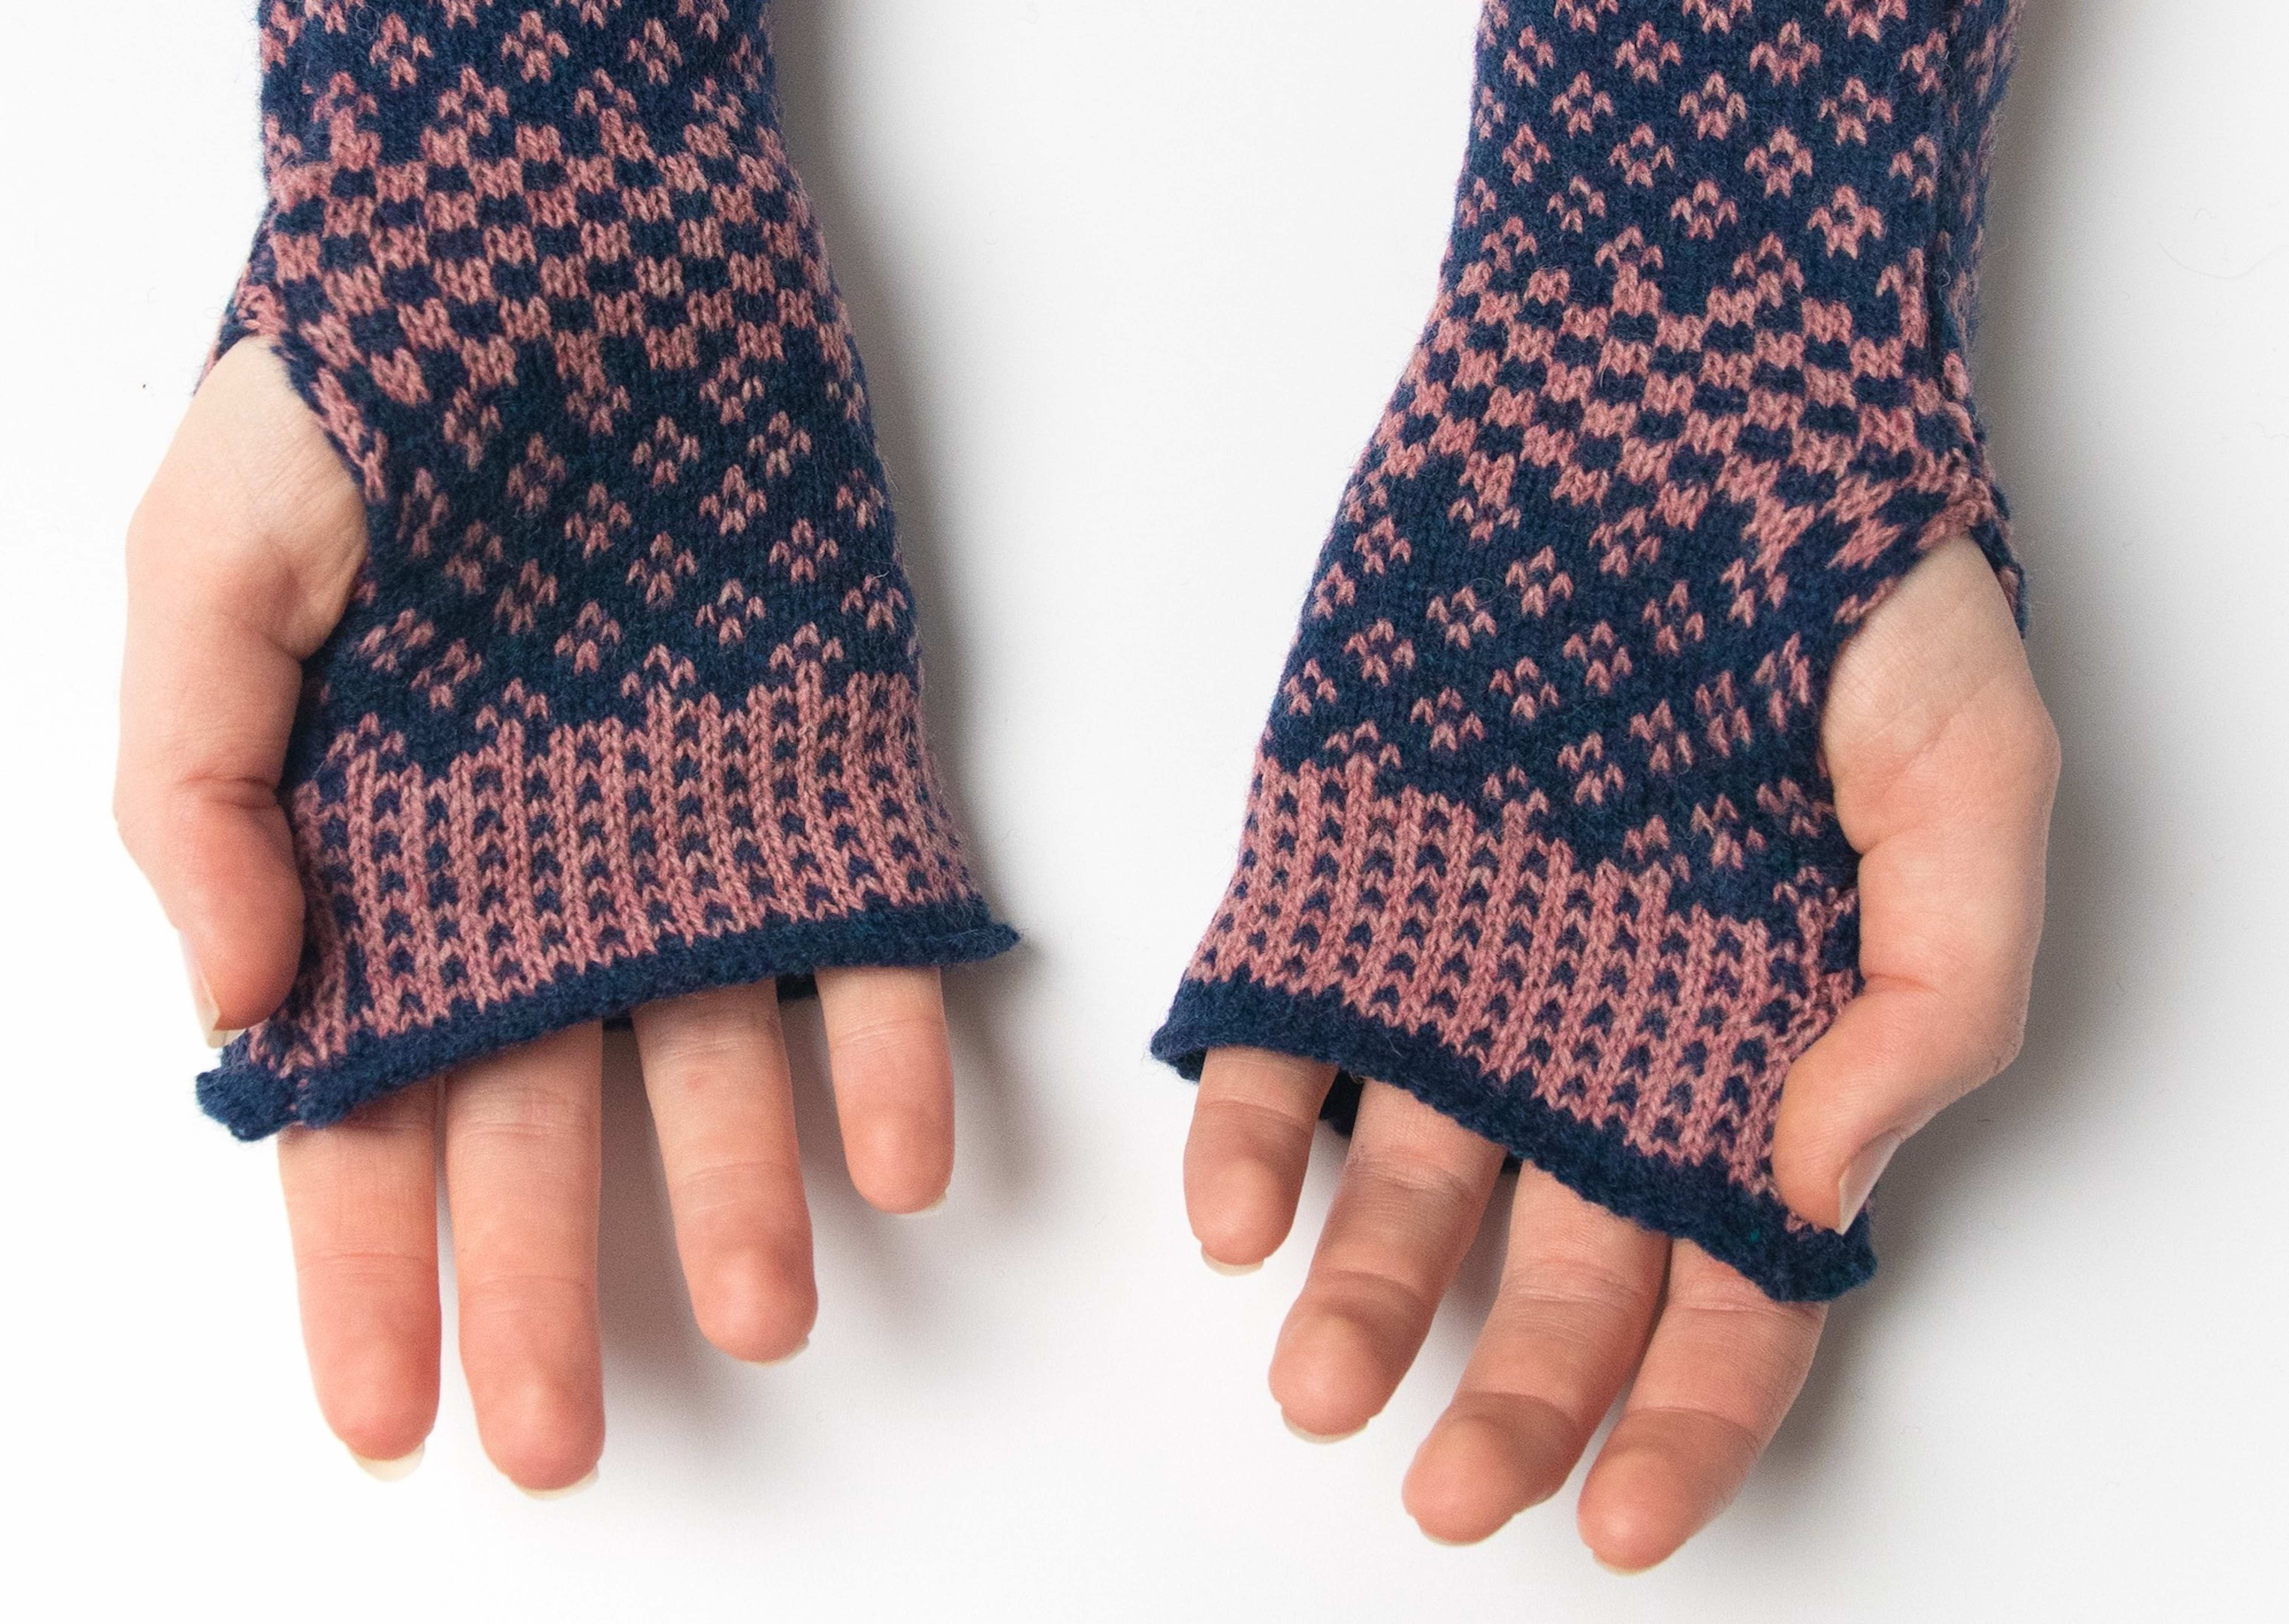 Image: Crafting Love - Fingerless Mittens Workshop with Elin Manon